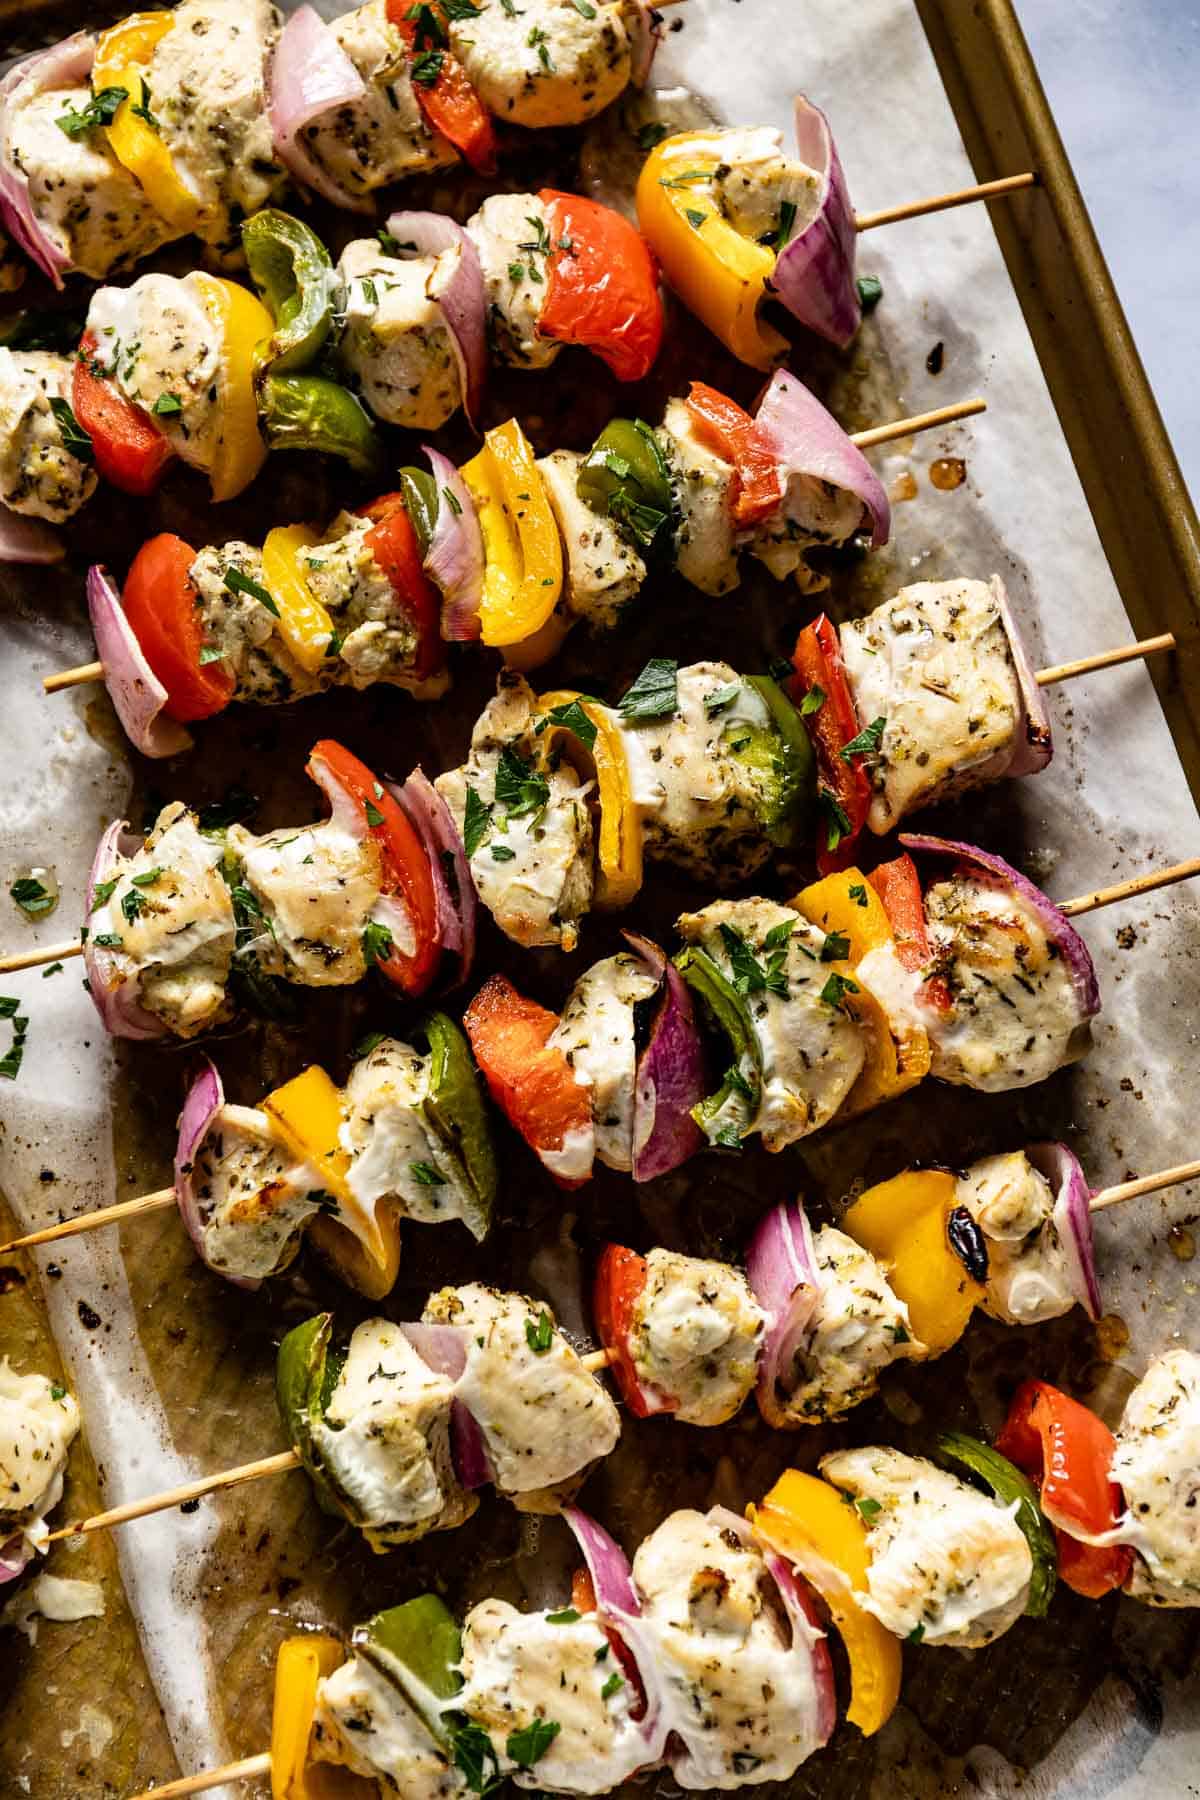 Baked chicken skewers in a sheet pan from the top view.